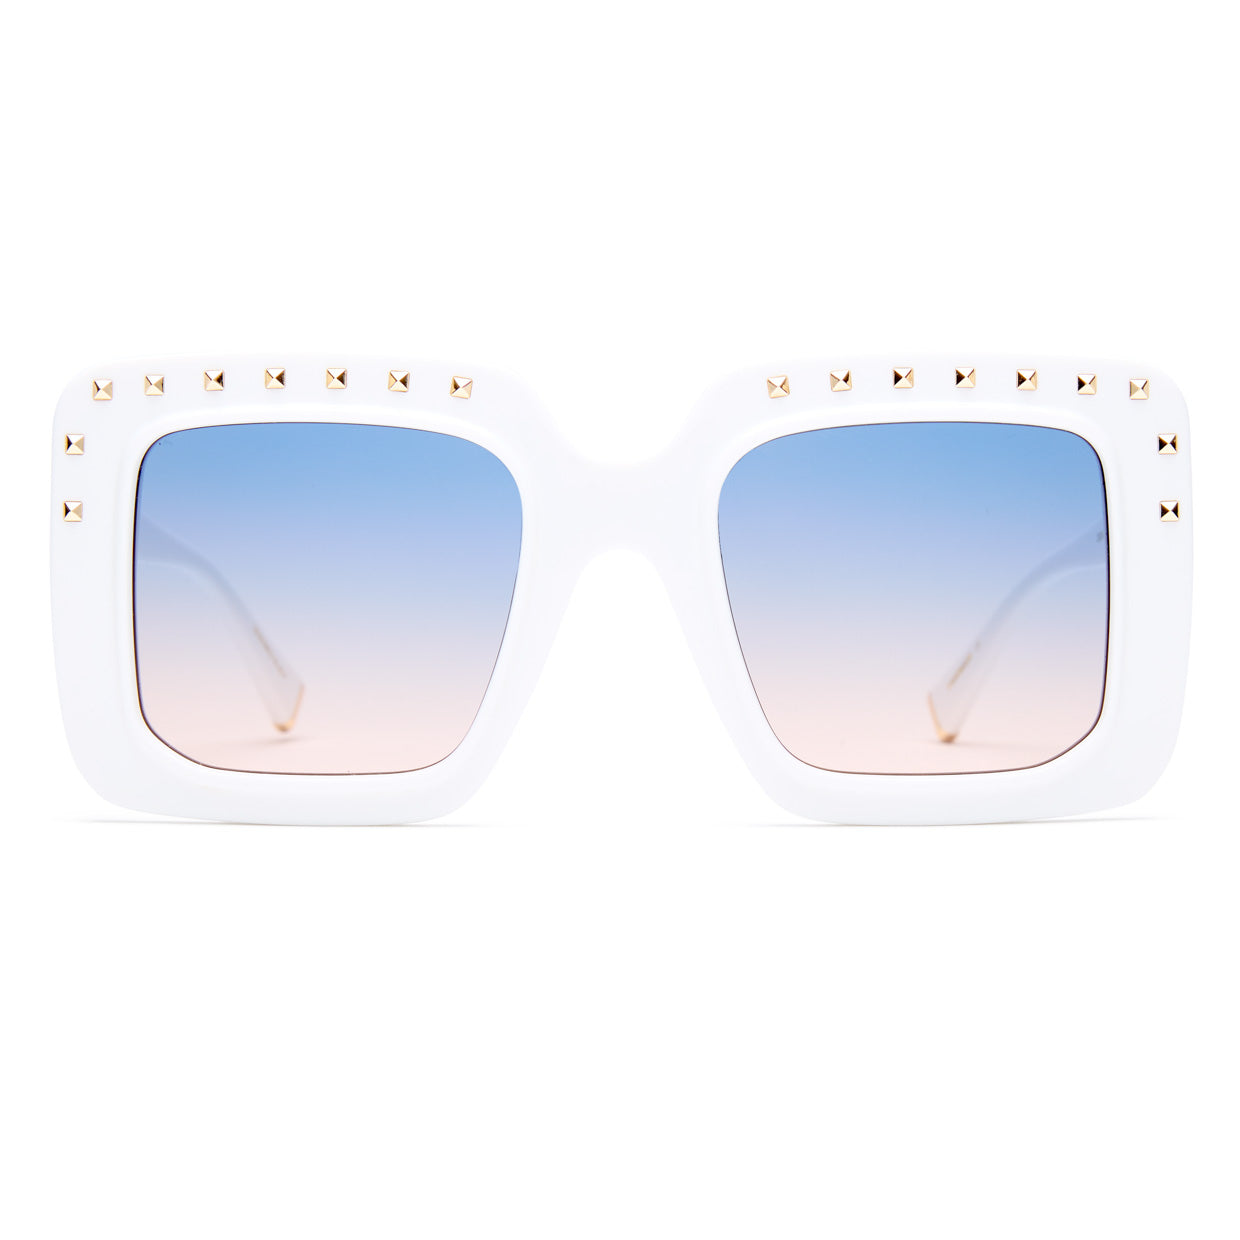 STUDS – Page 2 – Coco and Breezy Eyewear